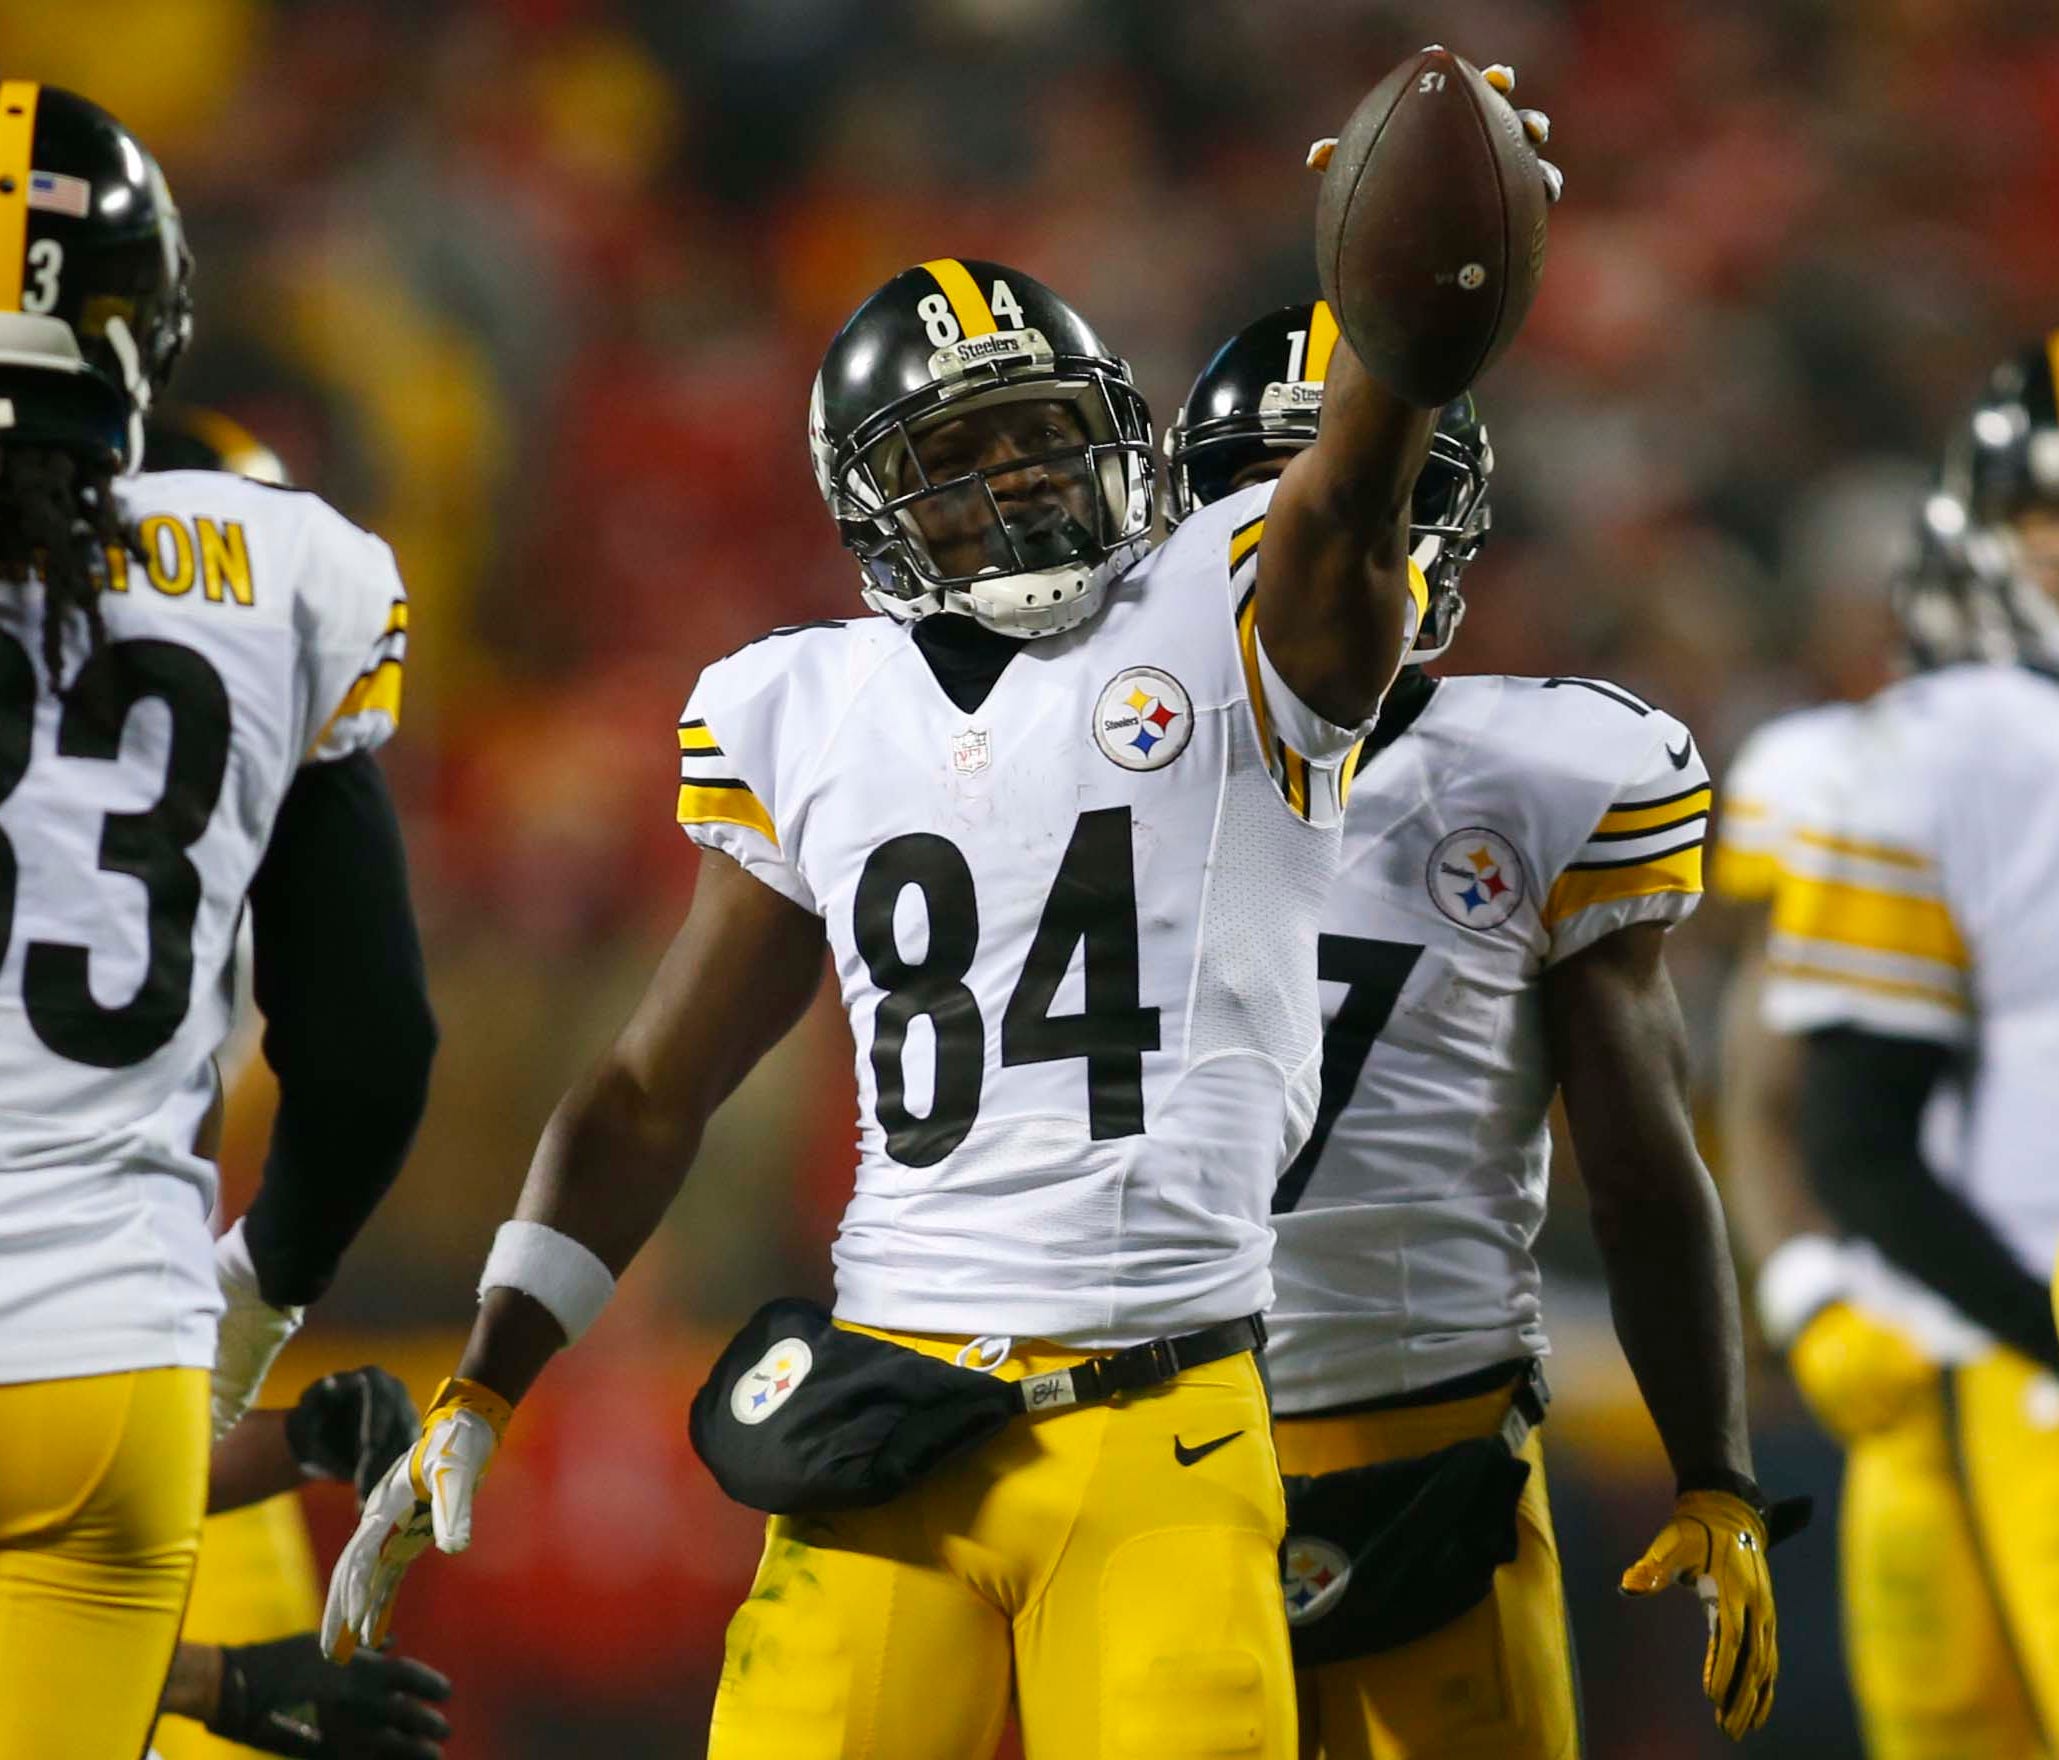 Pittsburgh Steelers wide receiver Antonio Brown (84) holds up the ball after a play during the second quarter against the Kansas City Chiefs in the AFC Divisional playoff game at Arrowhead Stadium.